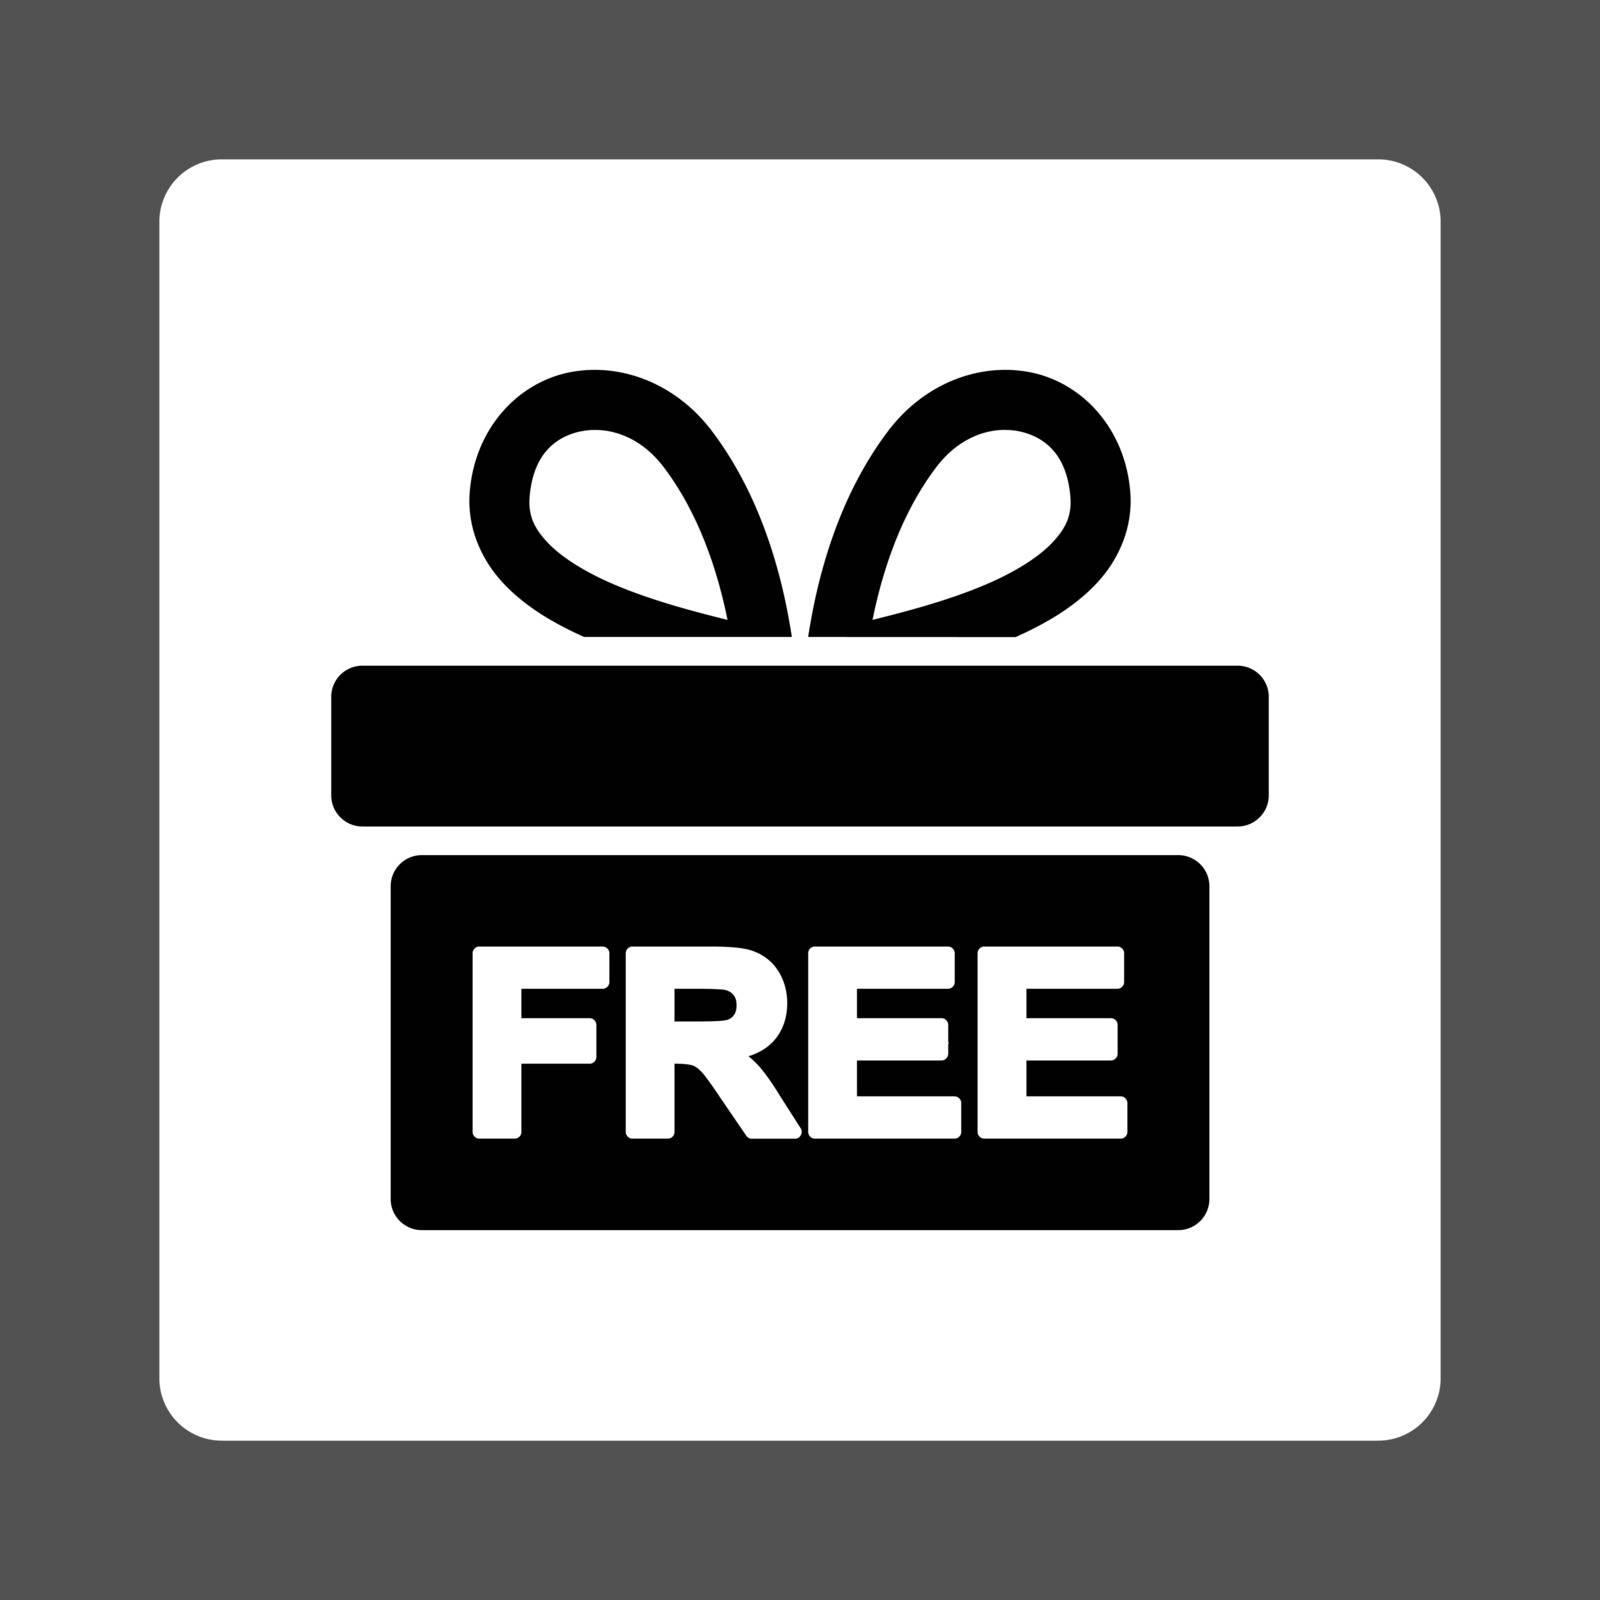 Gift icon. This flat rounded square button uses black and white colors and isolated on a gray background.